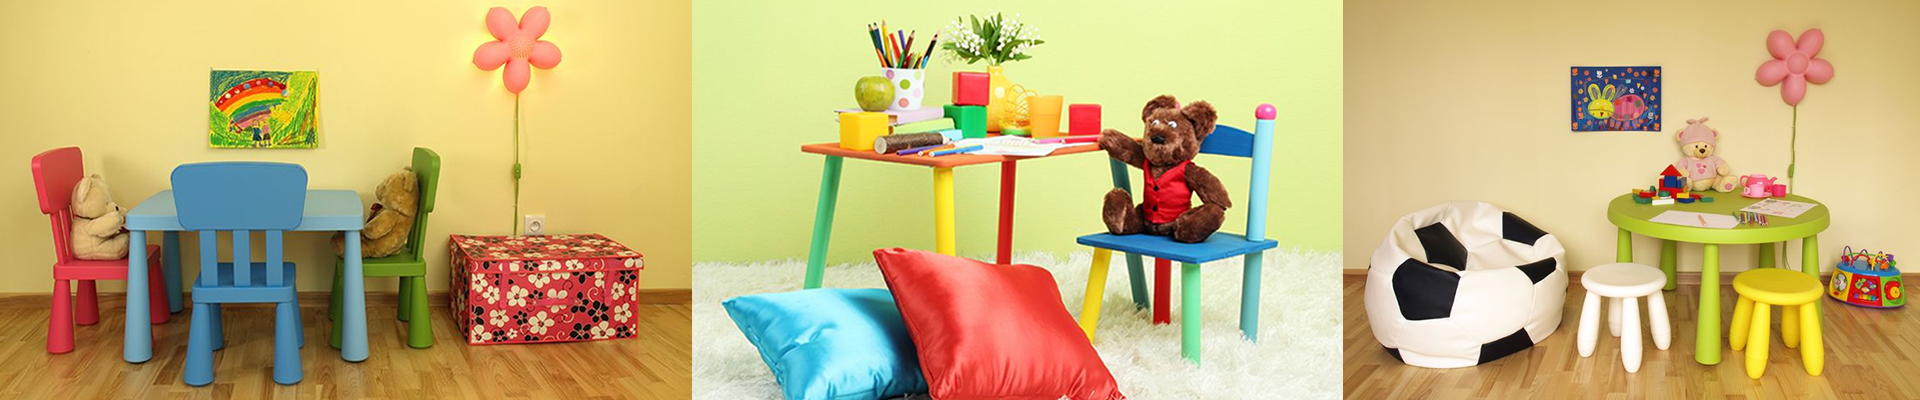 Kid's Table & Chair Sets | Tables & Chairs for Children